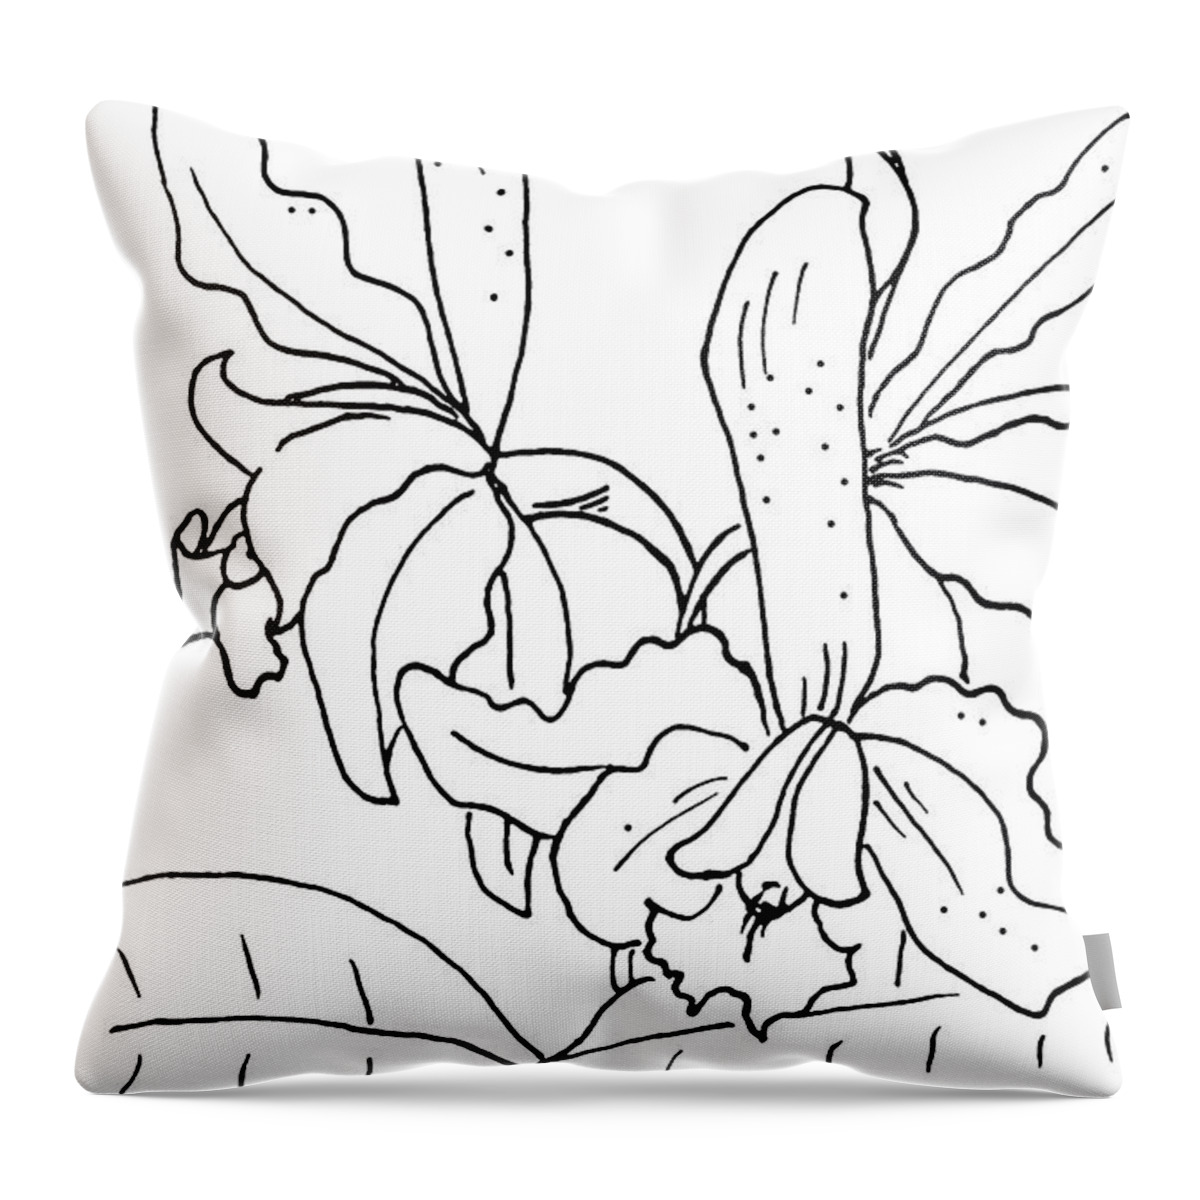 Orchid Throw Pillow featuring the drawing Orchid 4 by Masha Batkova